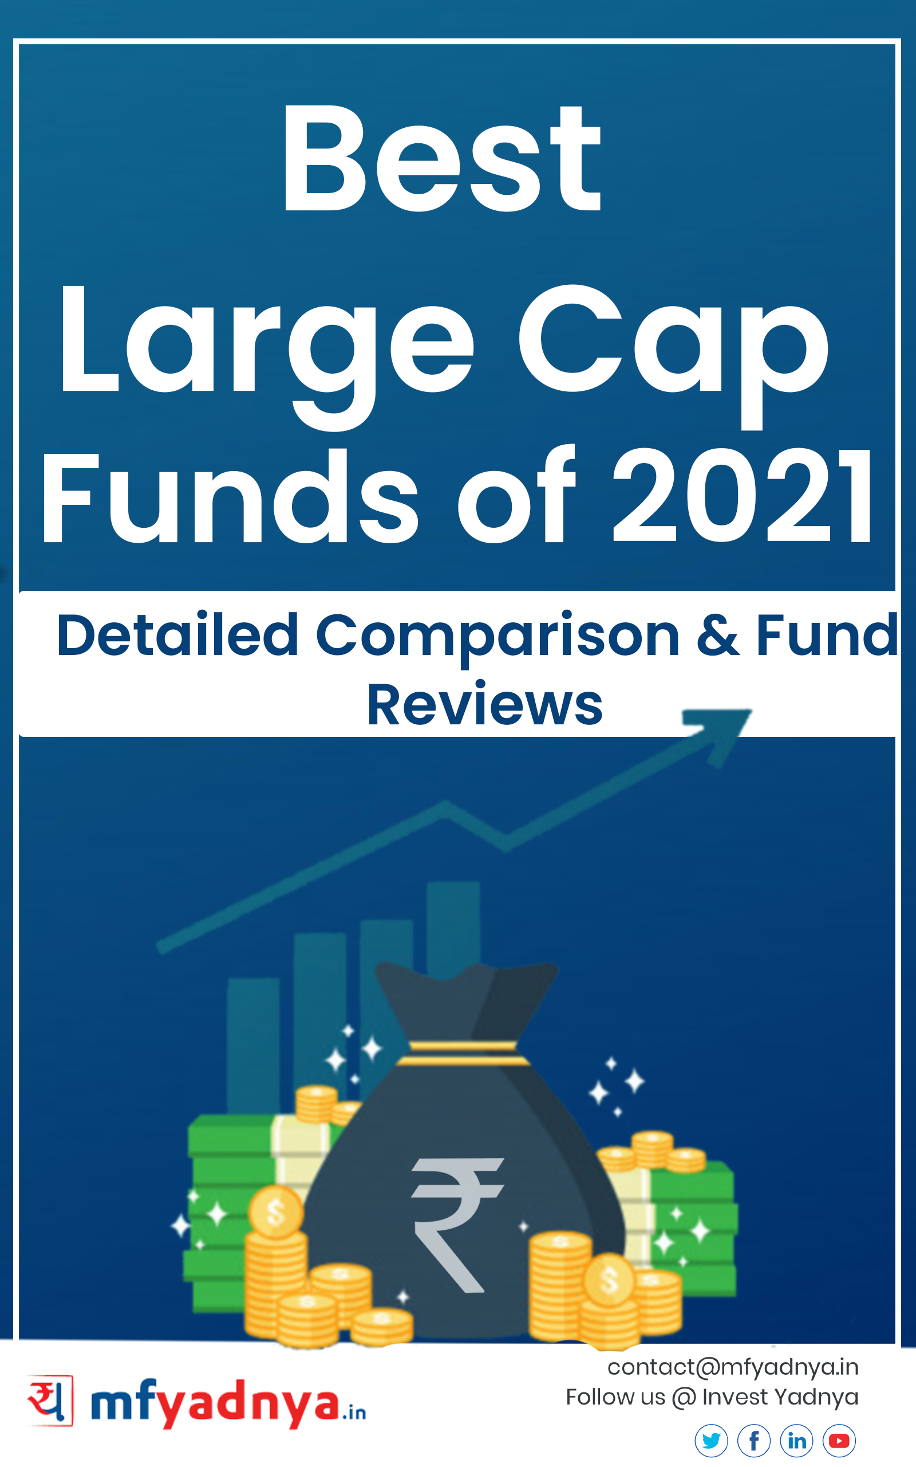 This e-book offers a comprehensive review of Best Large Cap Funds of 2021. It reviews the fund's return, ratio, allocation etc. ✔ Detailed Mutual Fund Analysis ✔ Mutual Fund Ebooks ✔ Financial Ebooks